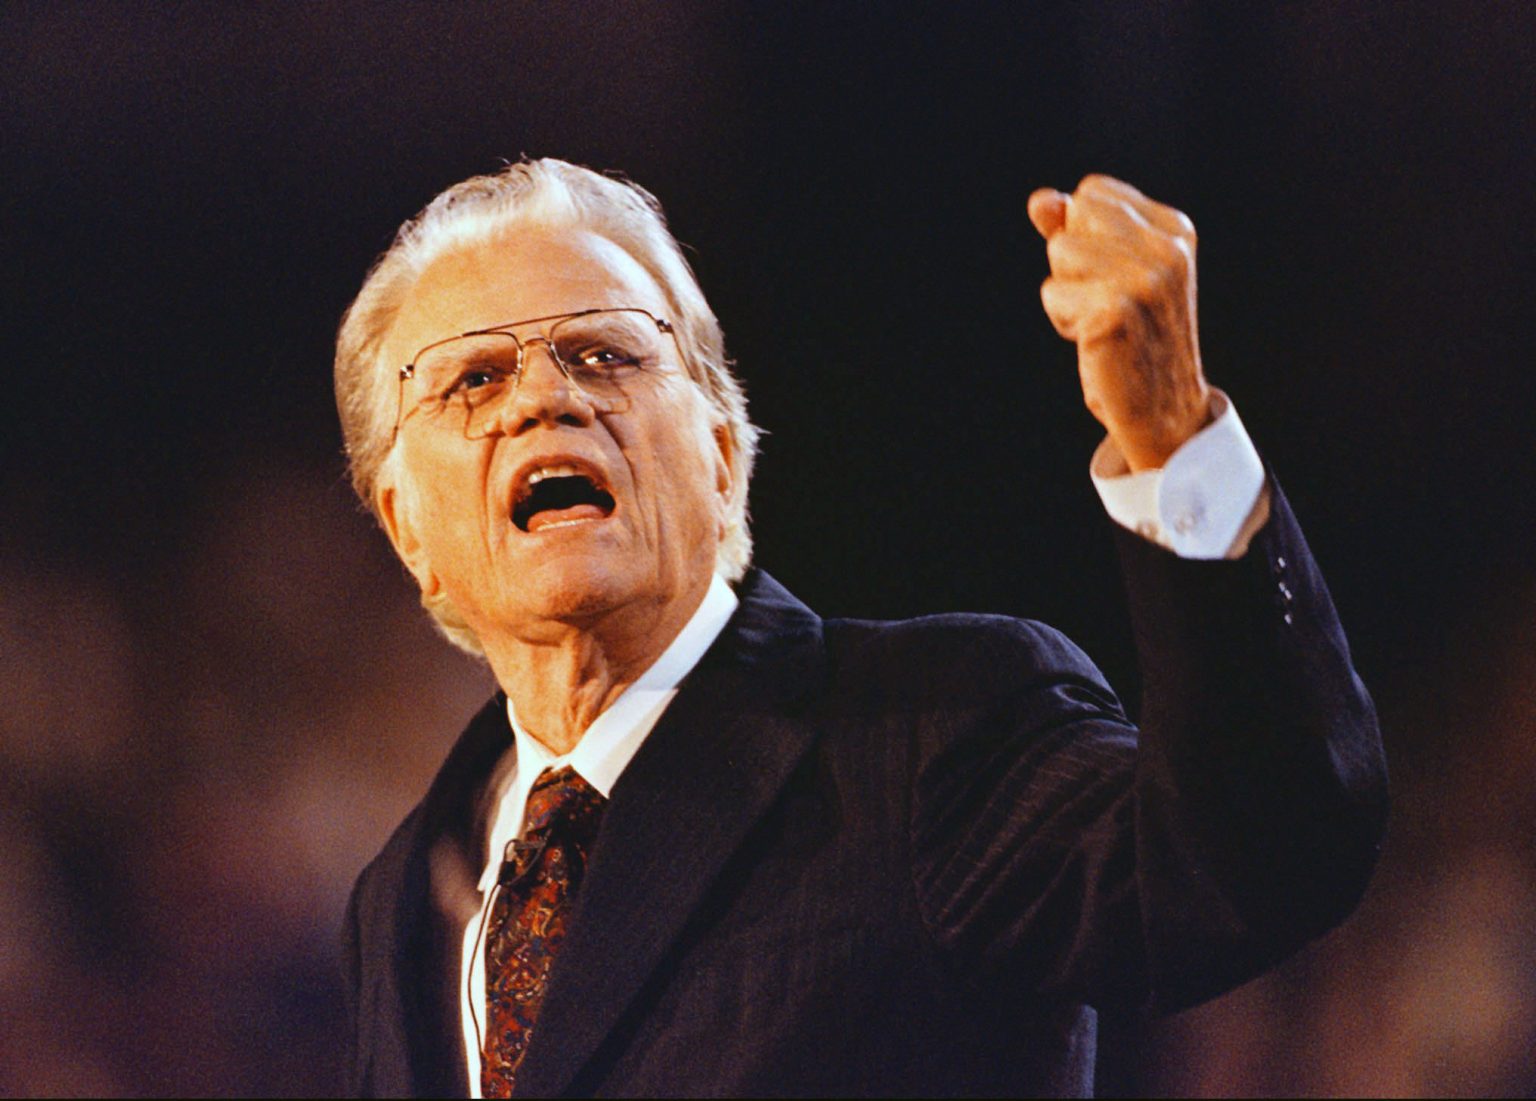 DOWNLOAD MP3: The Hope of the World by Evangelist BILLY GRAHAM (Sermon) 1